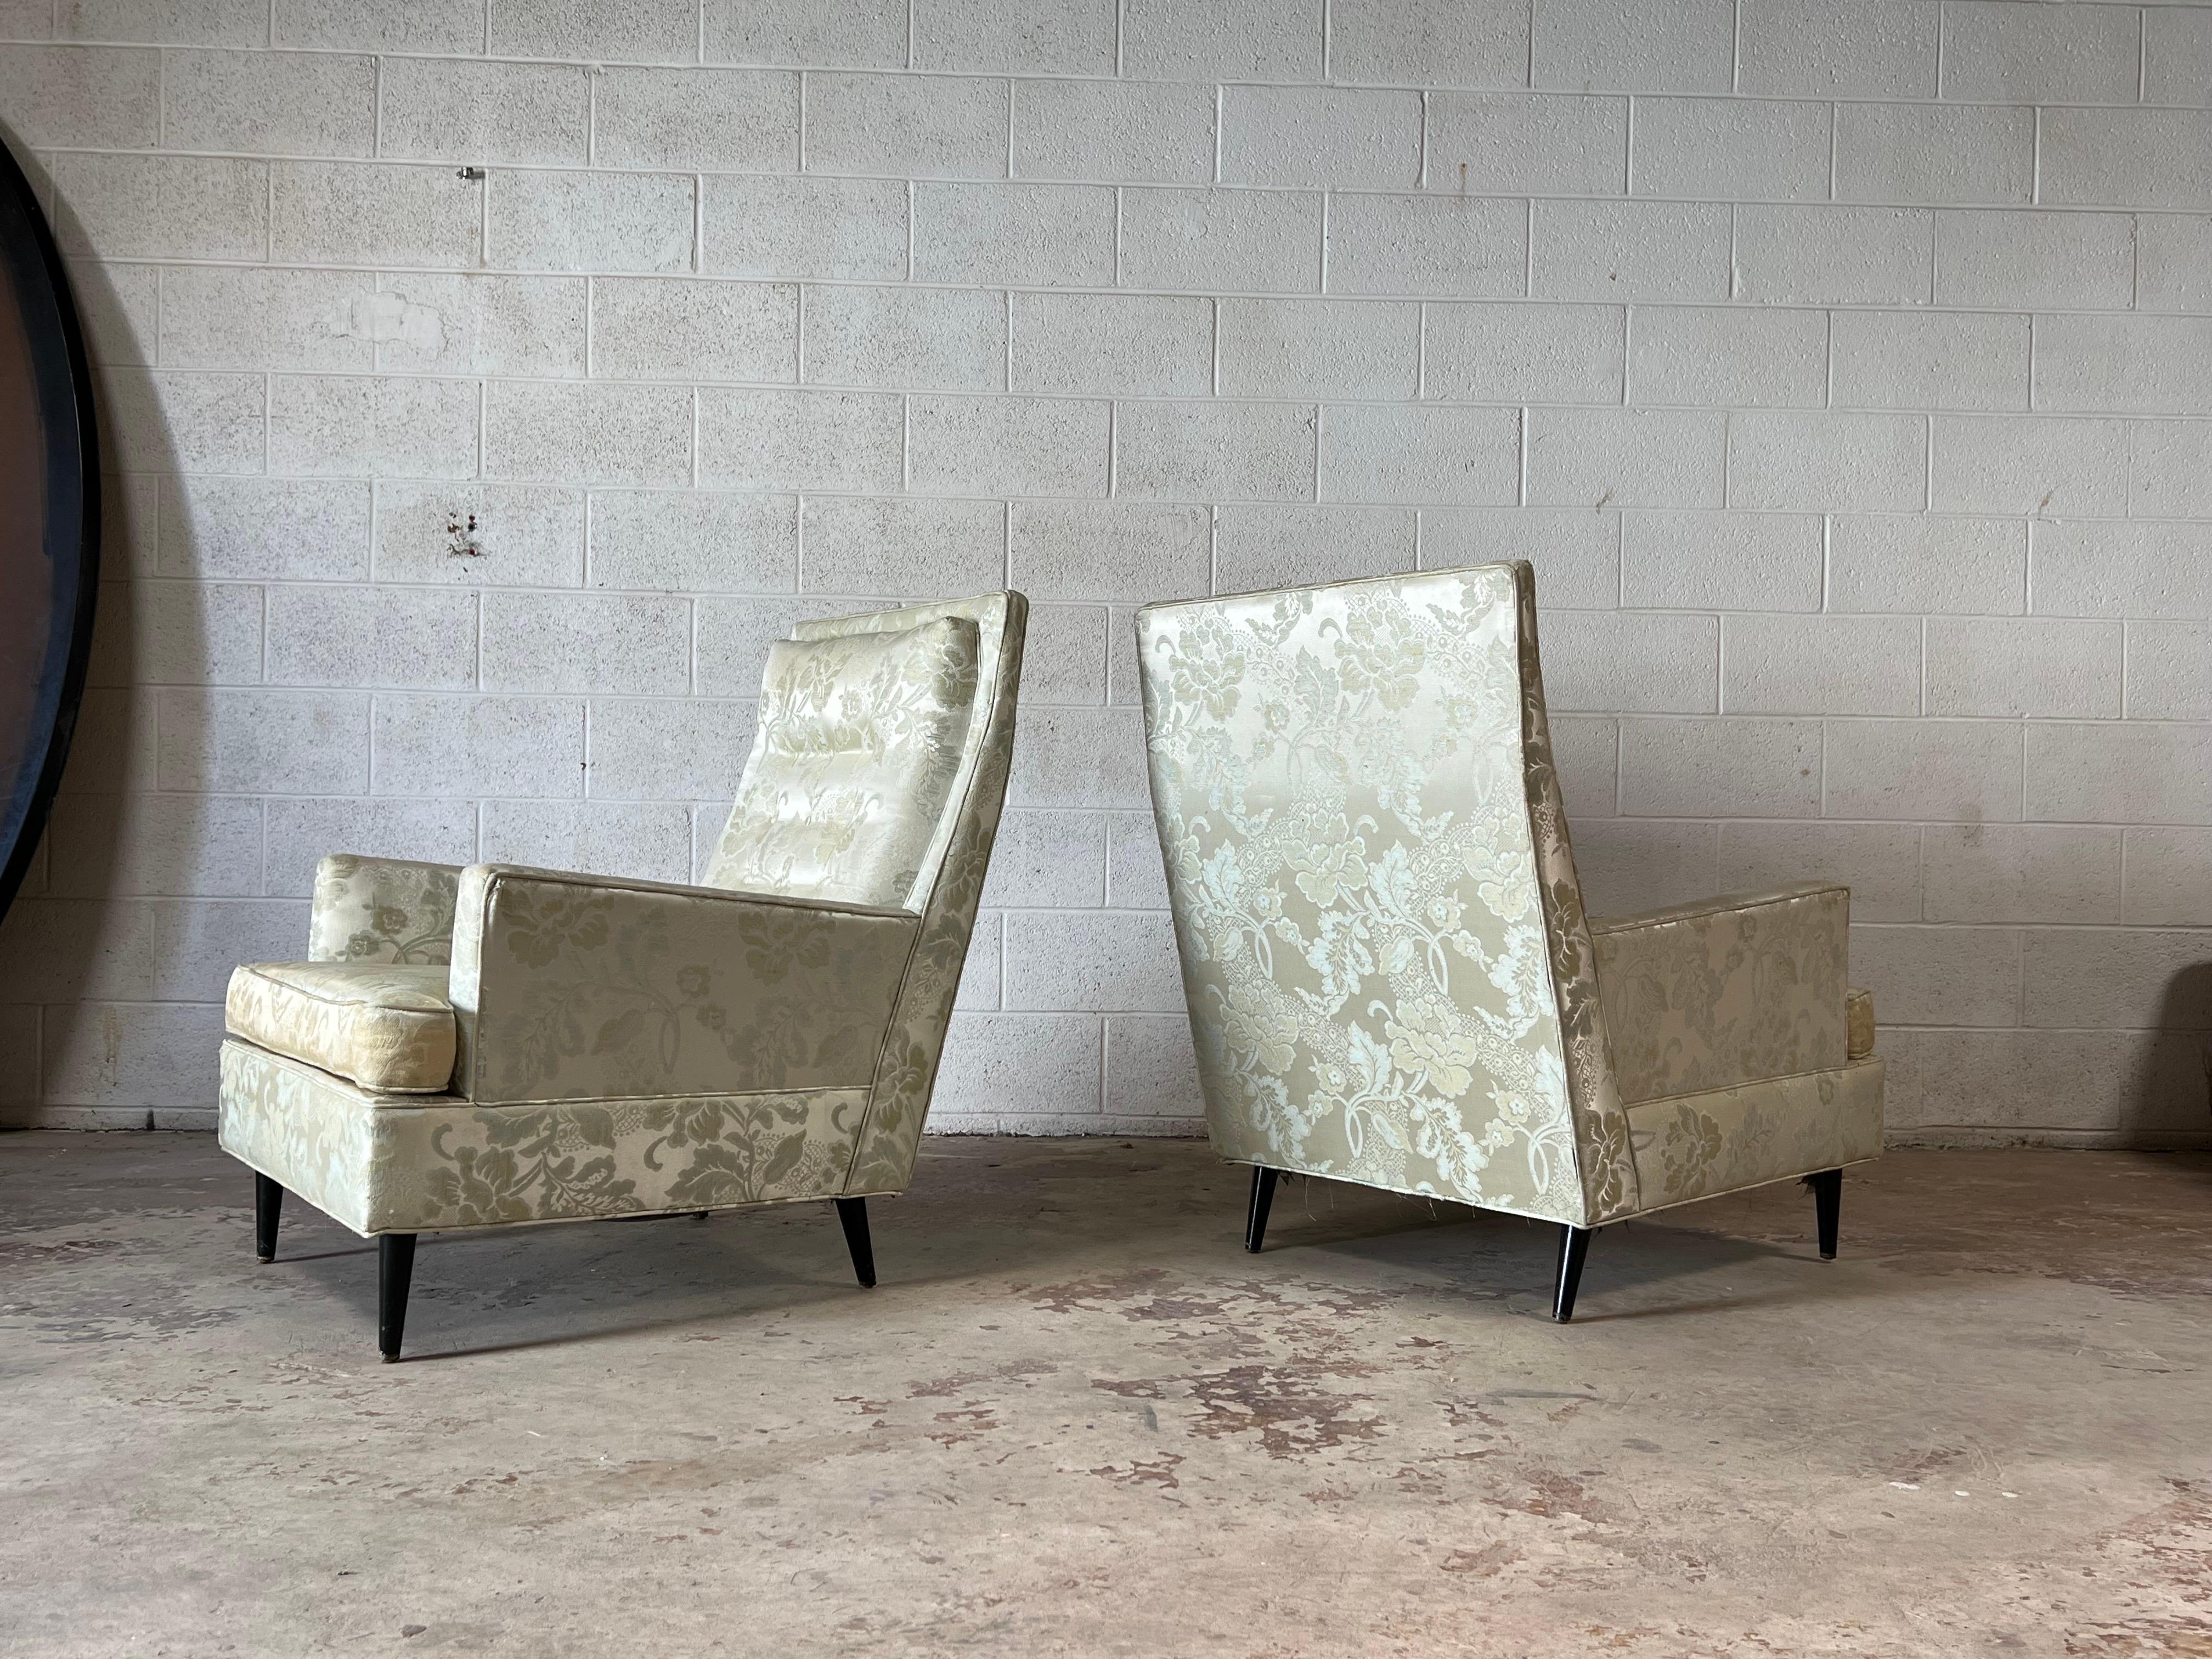 American Mid-Century Paul McCobb Style Lounge Chairs, a Pair